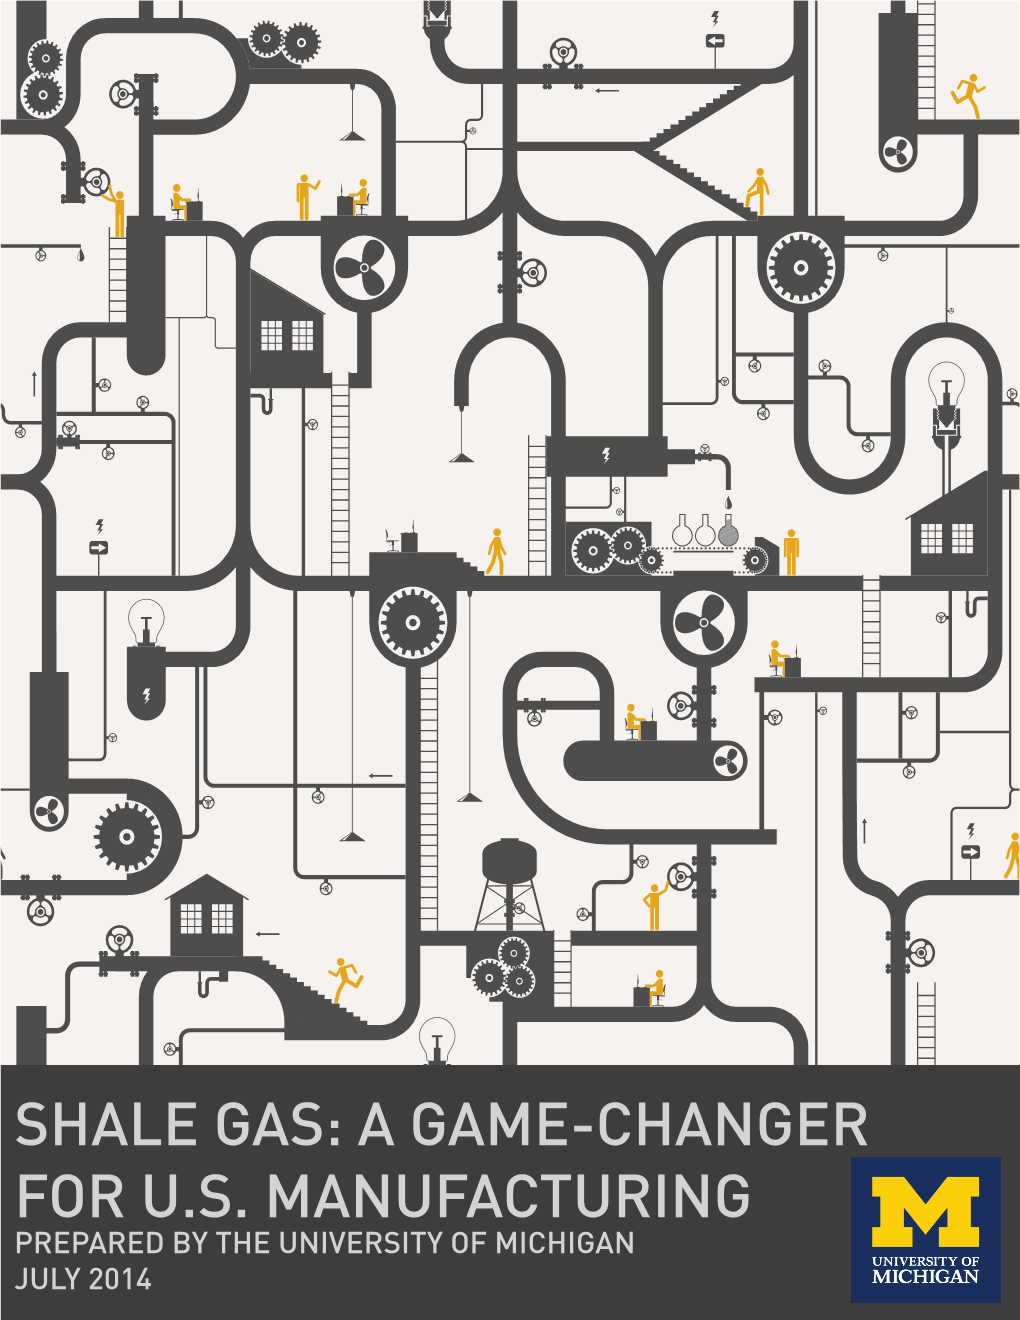 Shale Gas: a Game-Changer for U.S. Manufacturing Prepared by the University of Michigan July 2014 Shale Gas: a Game-Changer for U.S